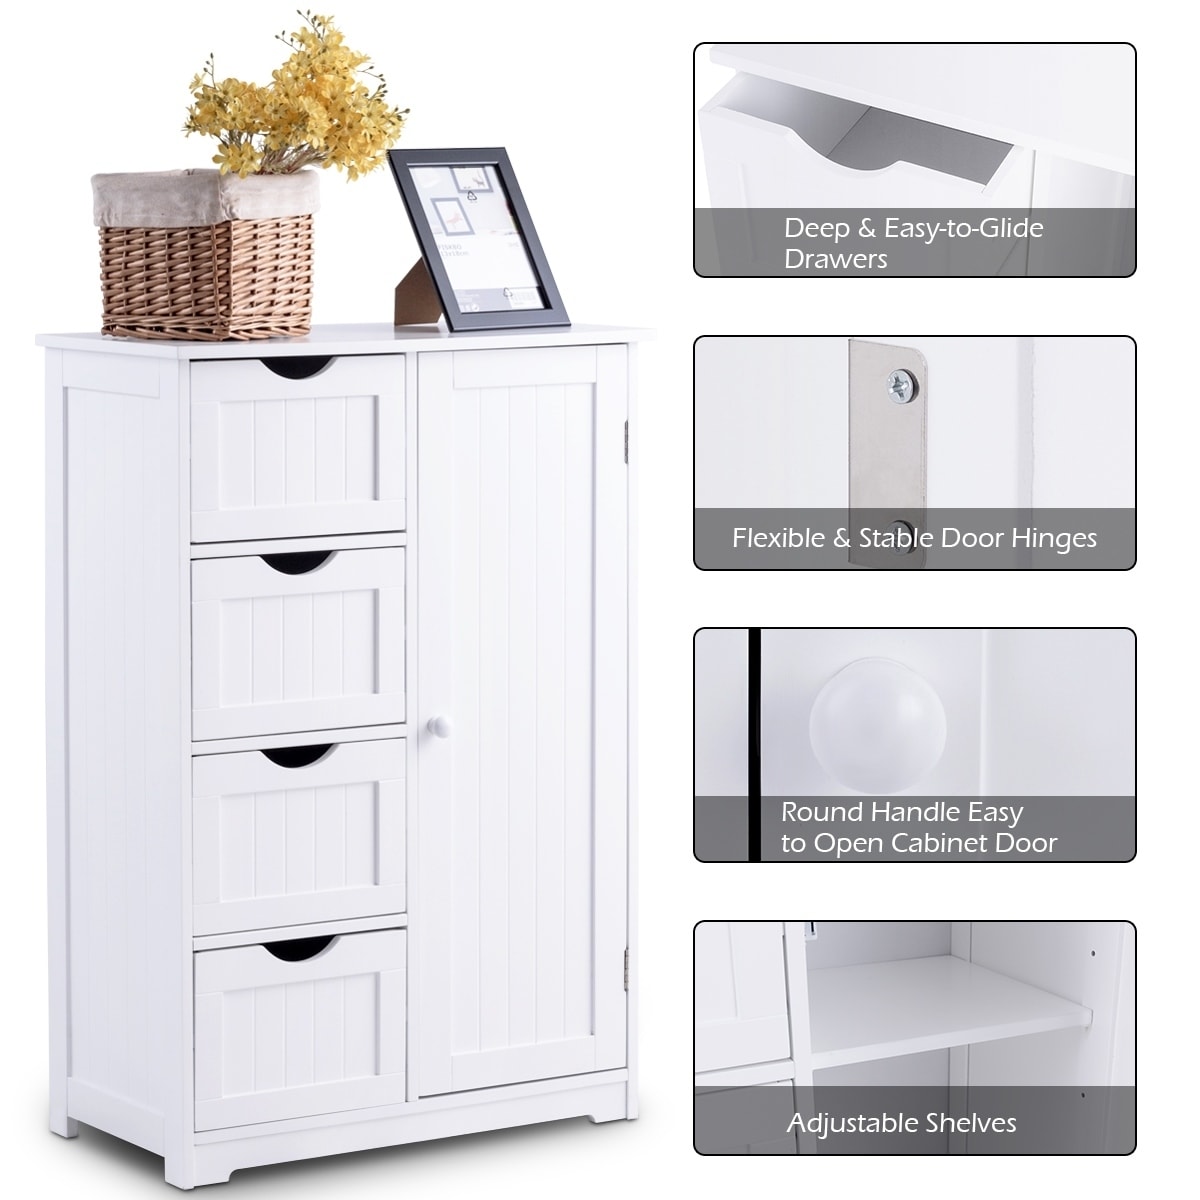 Details about   Single Door Bathroom Storage Cabinet With 4 Drawers White 